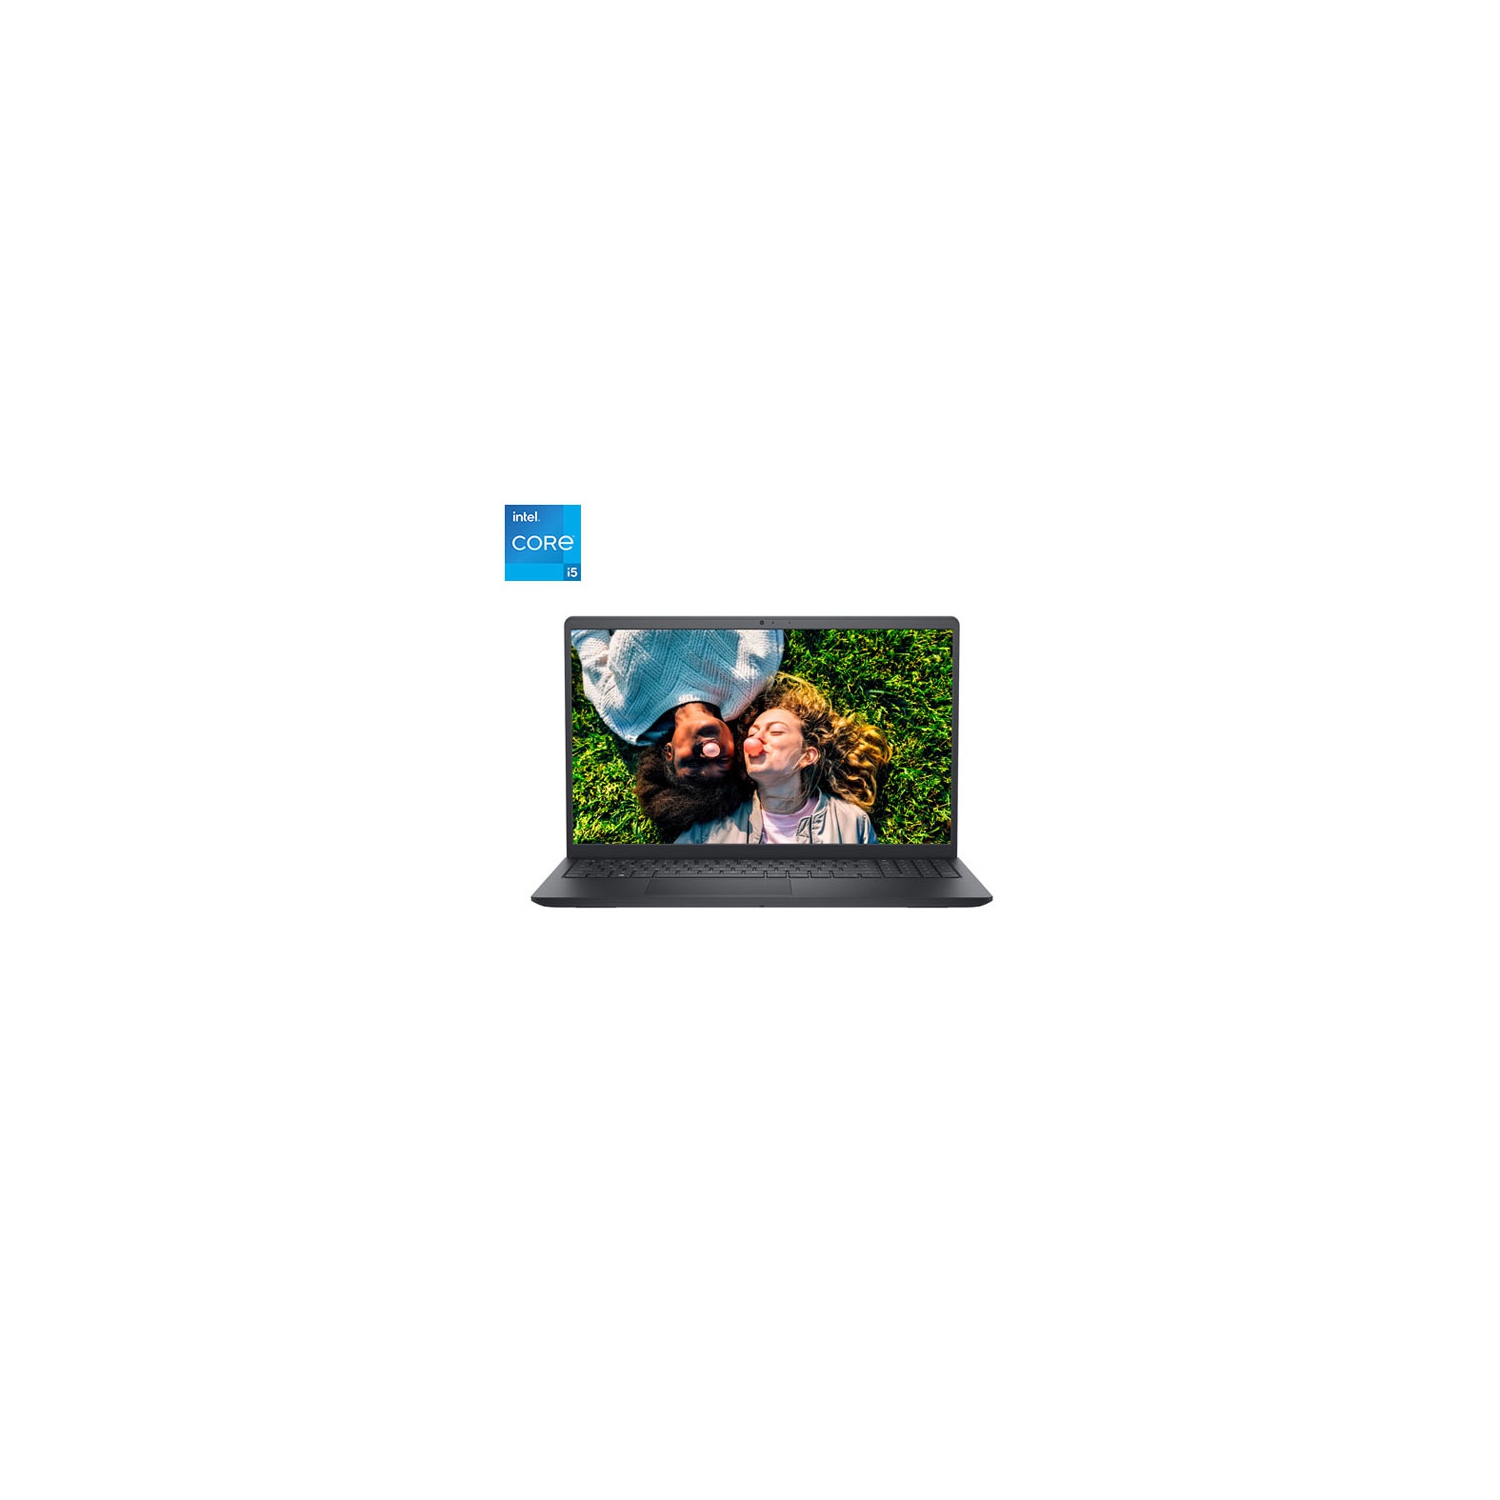 Refurbished (Excellent) - Dell Inspiron 3511 15.6" Touchscreen Laptop - Black (Intel Core i5-1135G7/256GB SSD/8GB RAM/Windows 11 S)